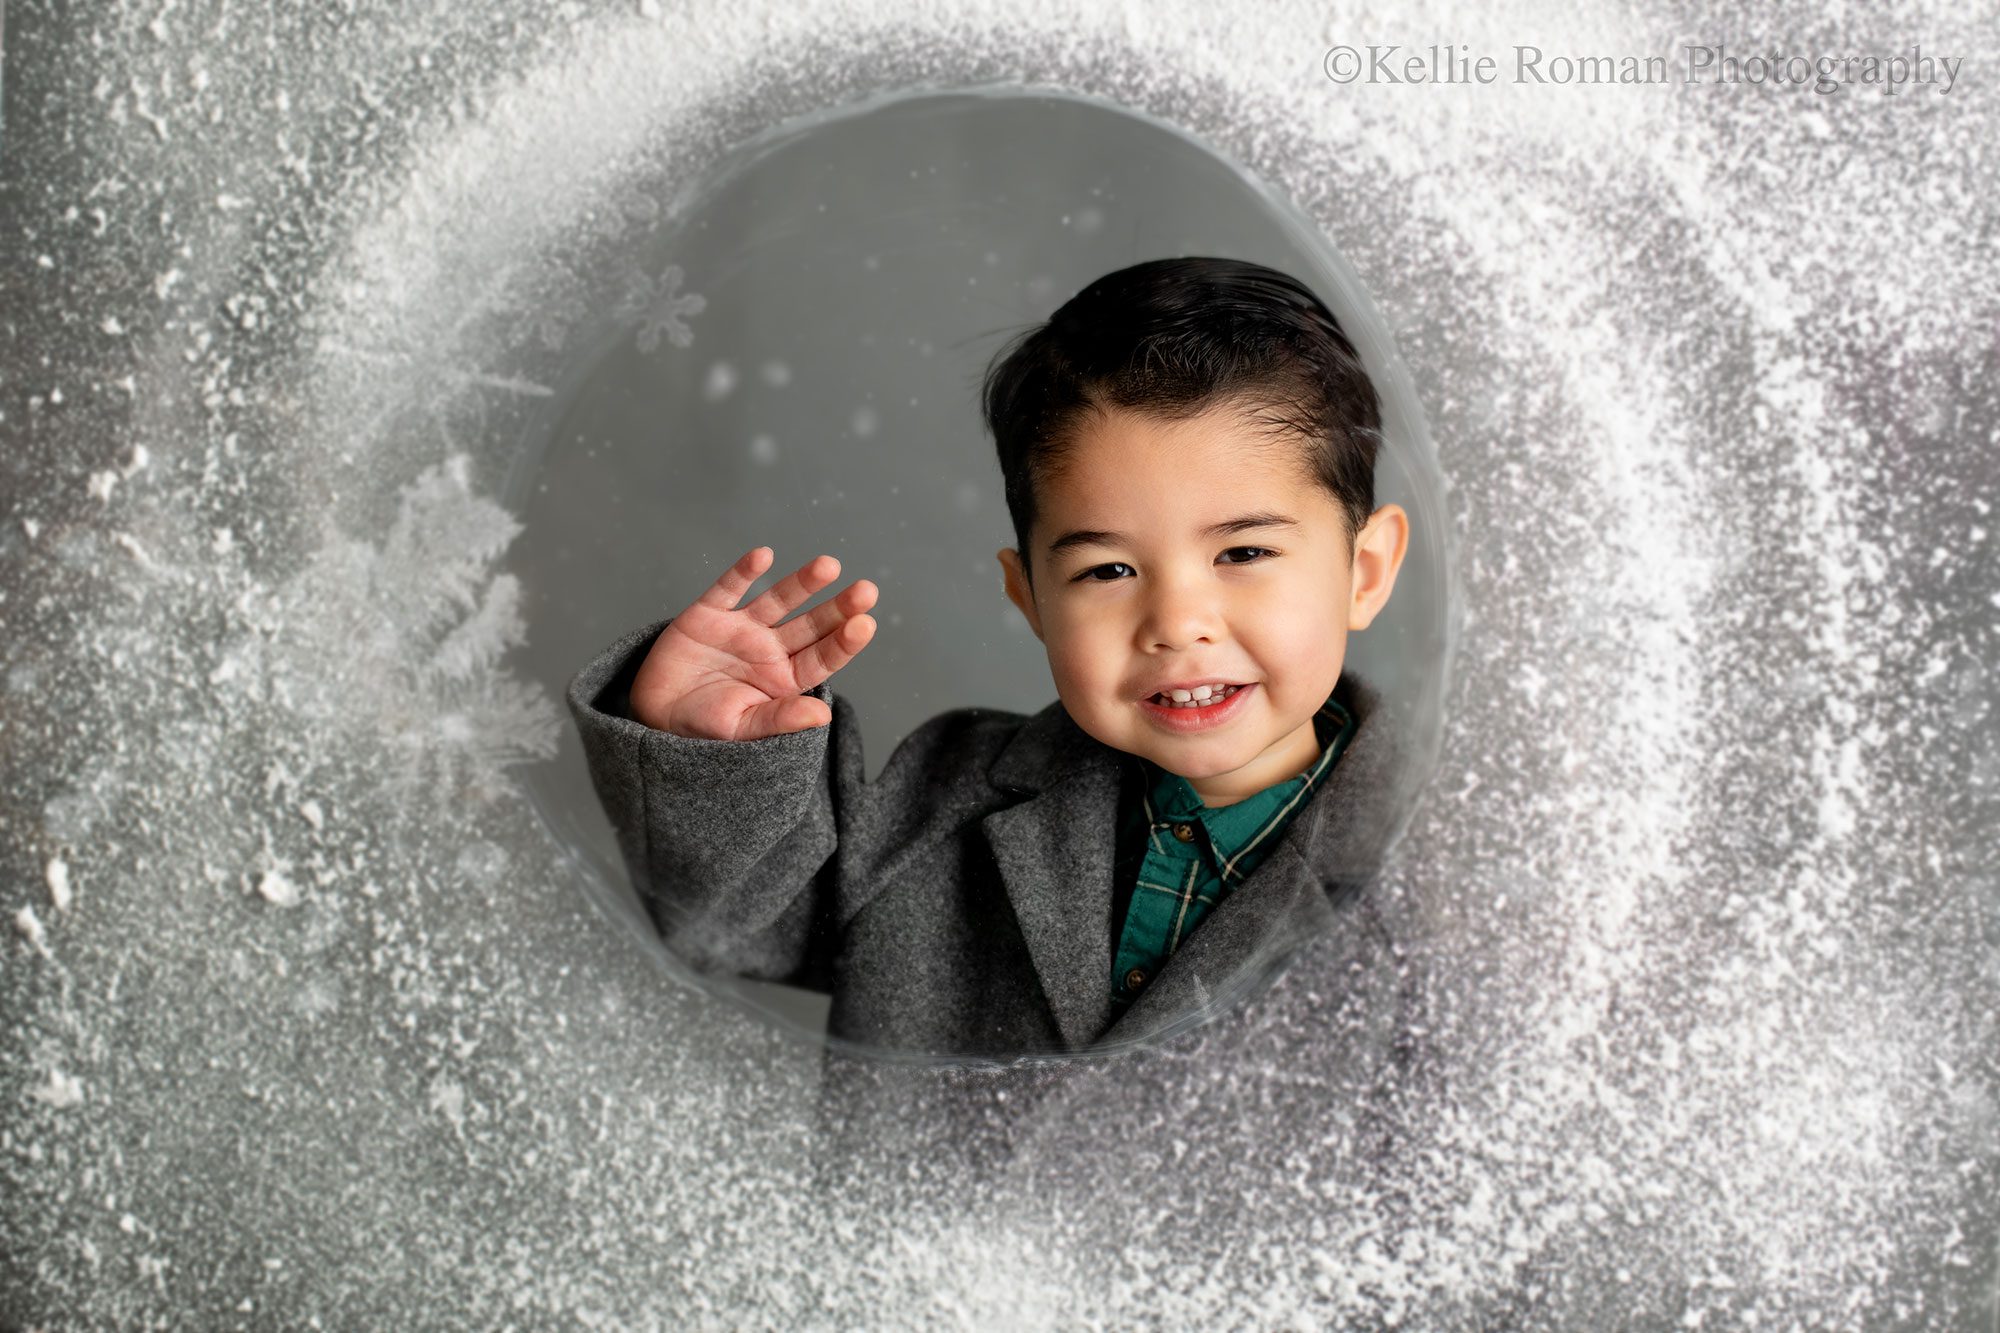 birthday photographer milwaukee. a young boy is standing behind piece of glass with snow sprayed on it waving. he is smiling with dark black hair and a grey jacket. 